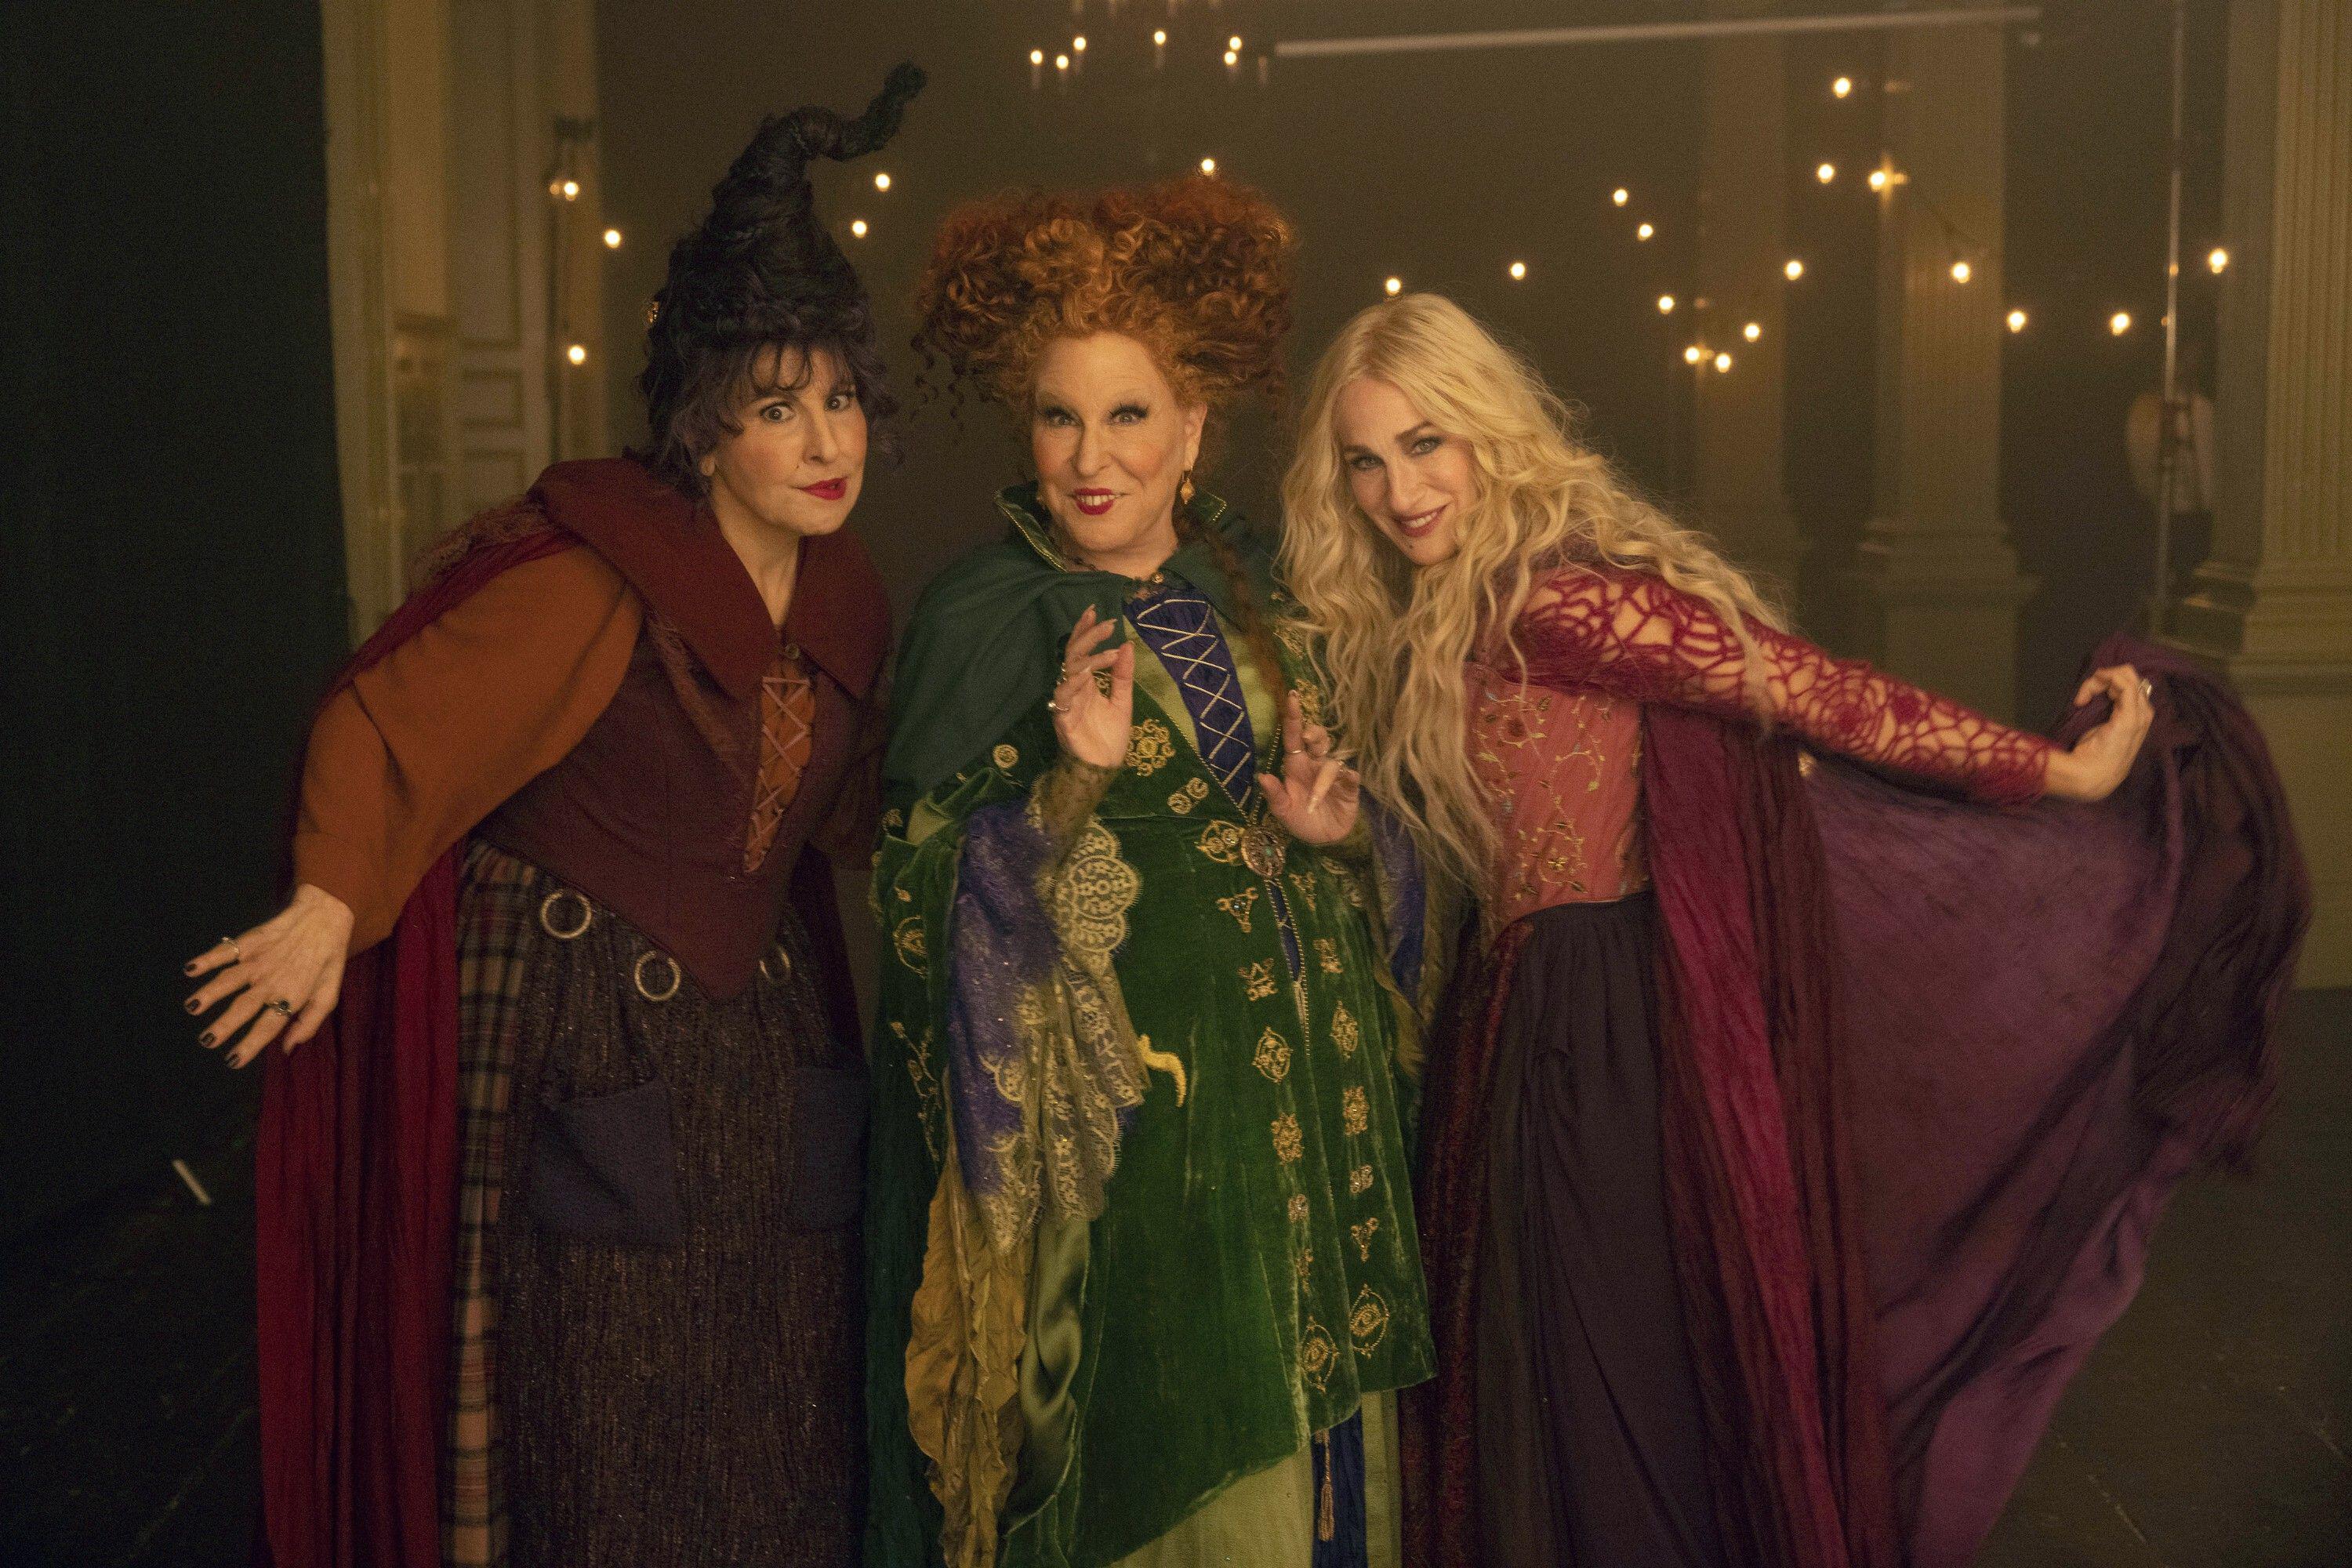 Hocus Pocus 2 was released nearly two decades after the original film